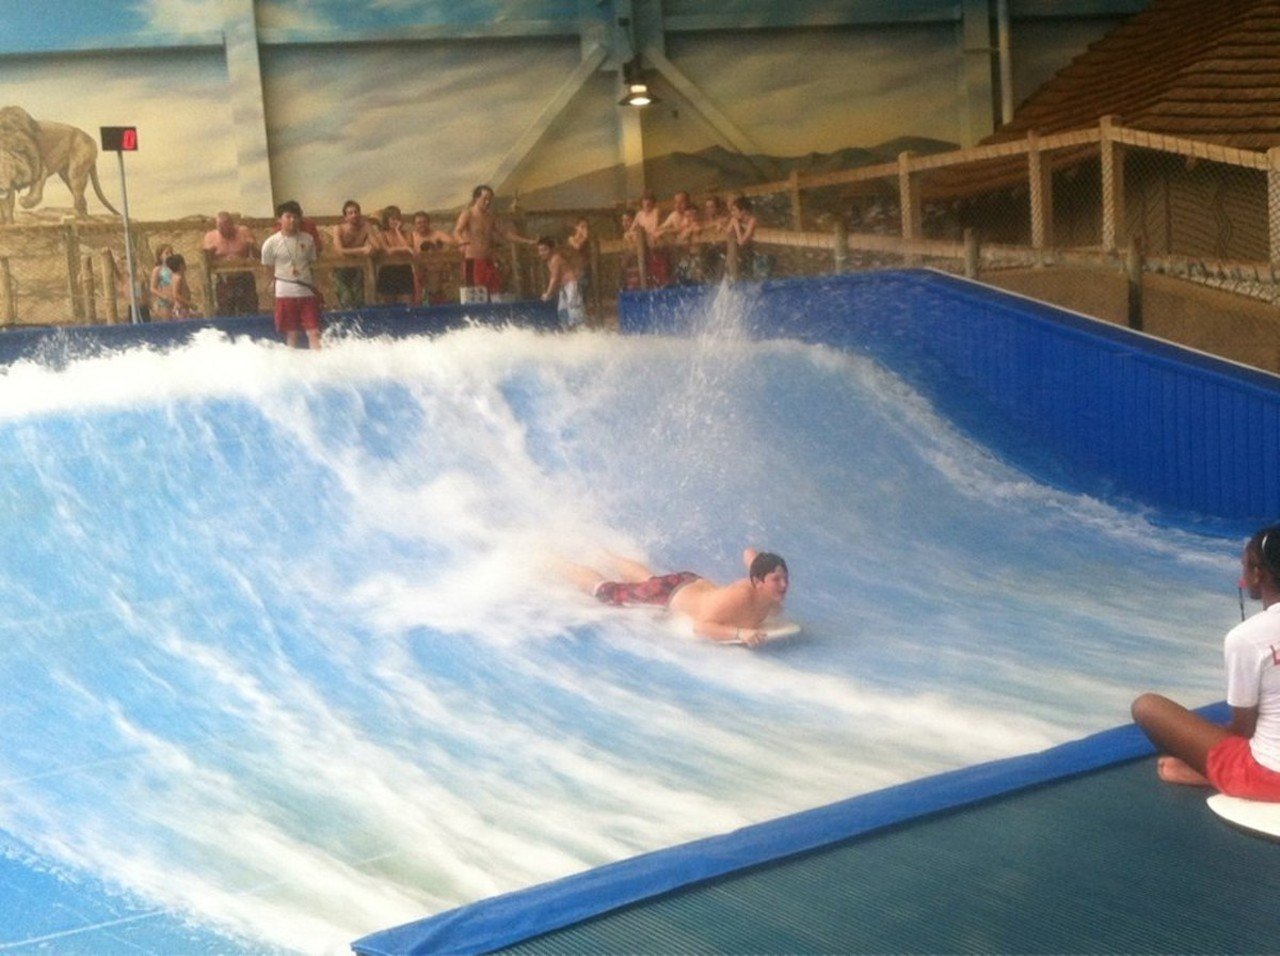 Splash Around at Kalahari Resort
7000 Kalahari Drive, Sandusky
Everybody knows about the top attraction in Sandusky is Cedar Point. But if you’re itching for some more fun while you cool off after a hot day of rides, Kalahari, the indoor waterpark, is just the place for a day or weekend of family activities.